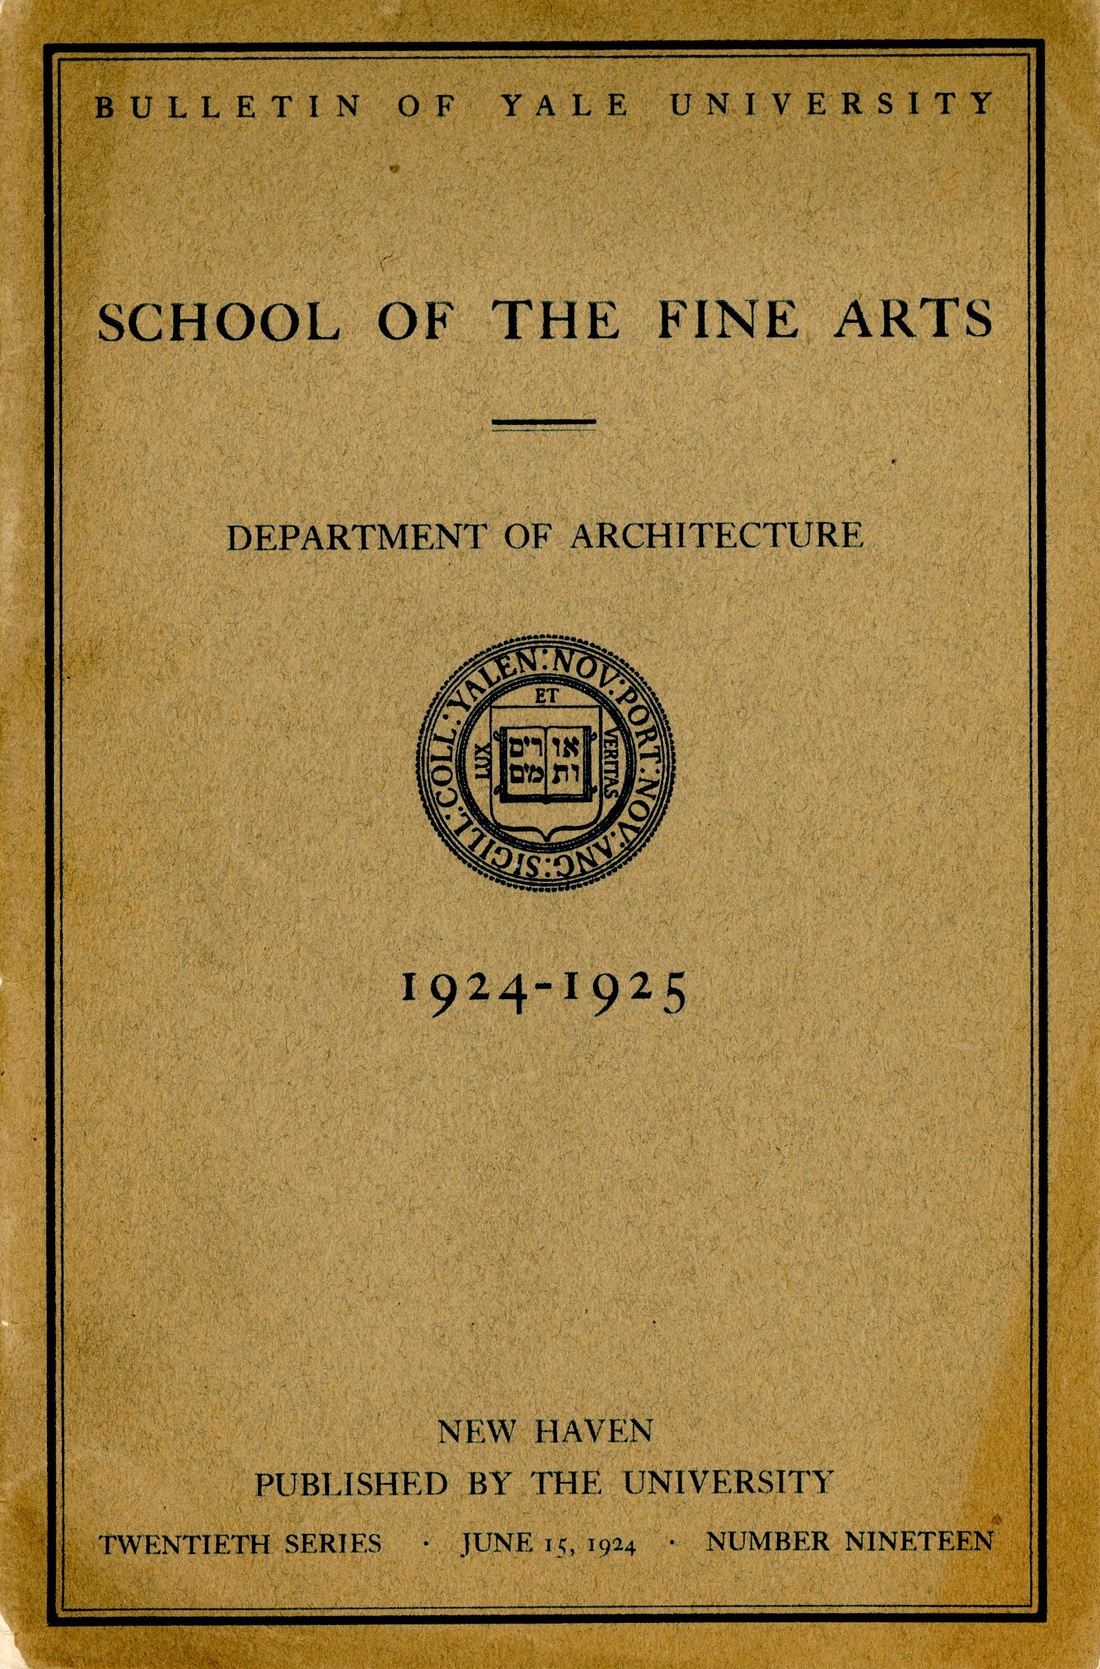 Department of Architecture Bulletin from 1924